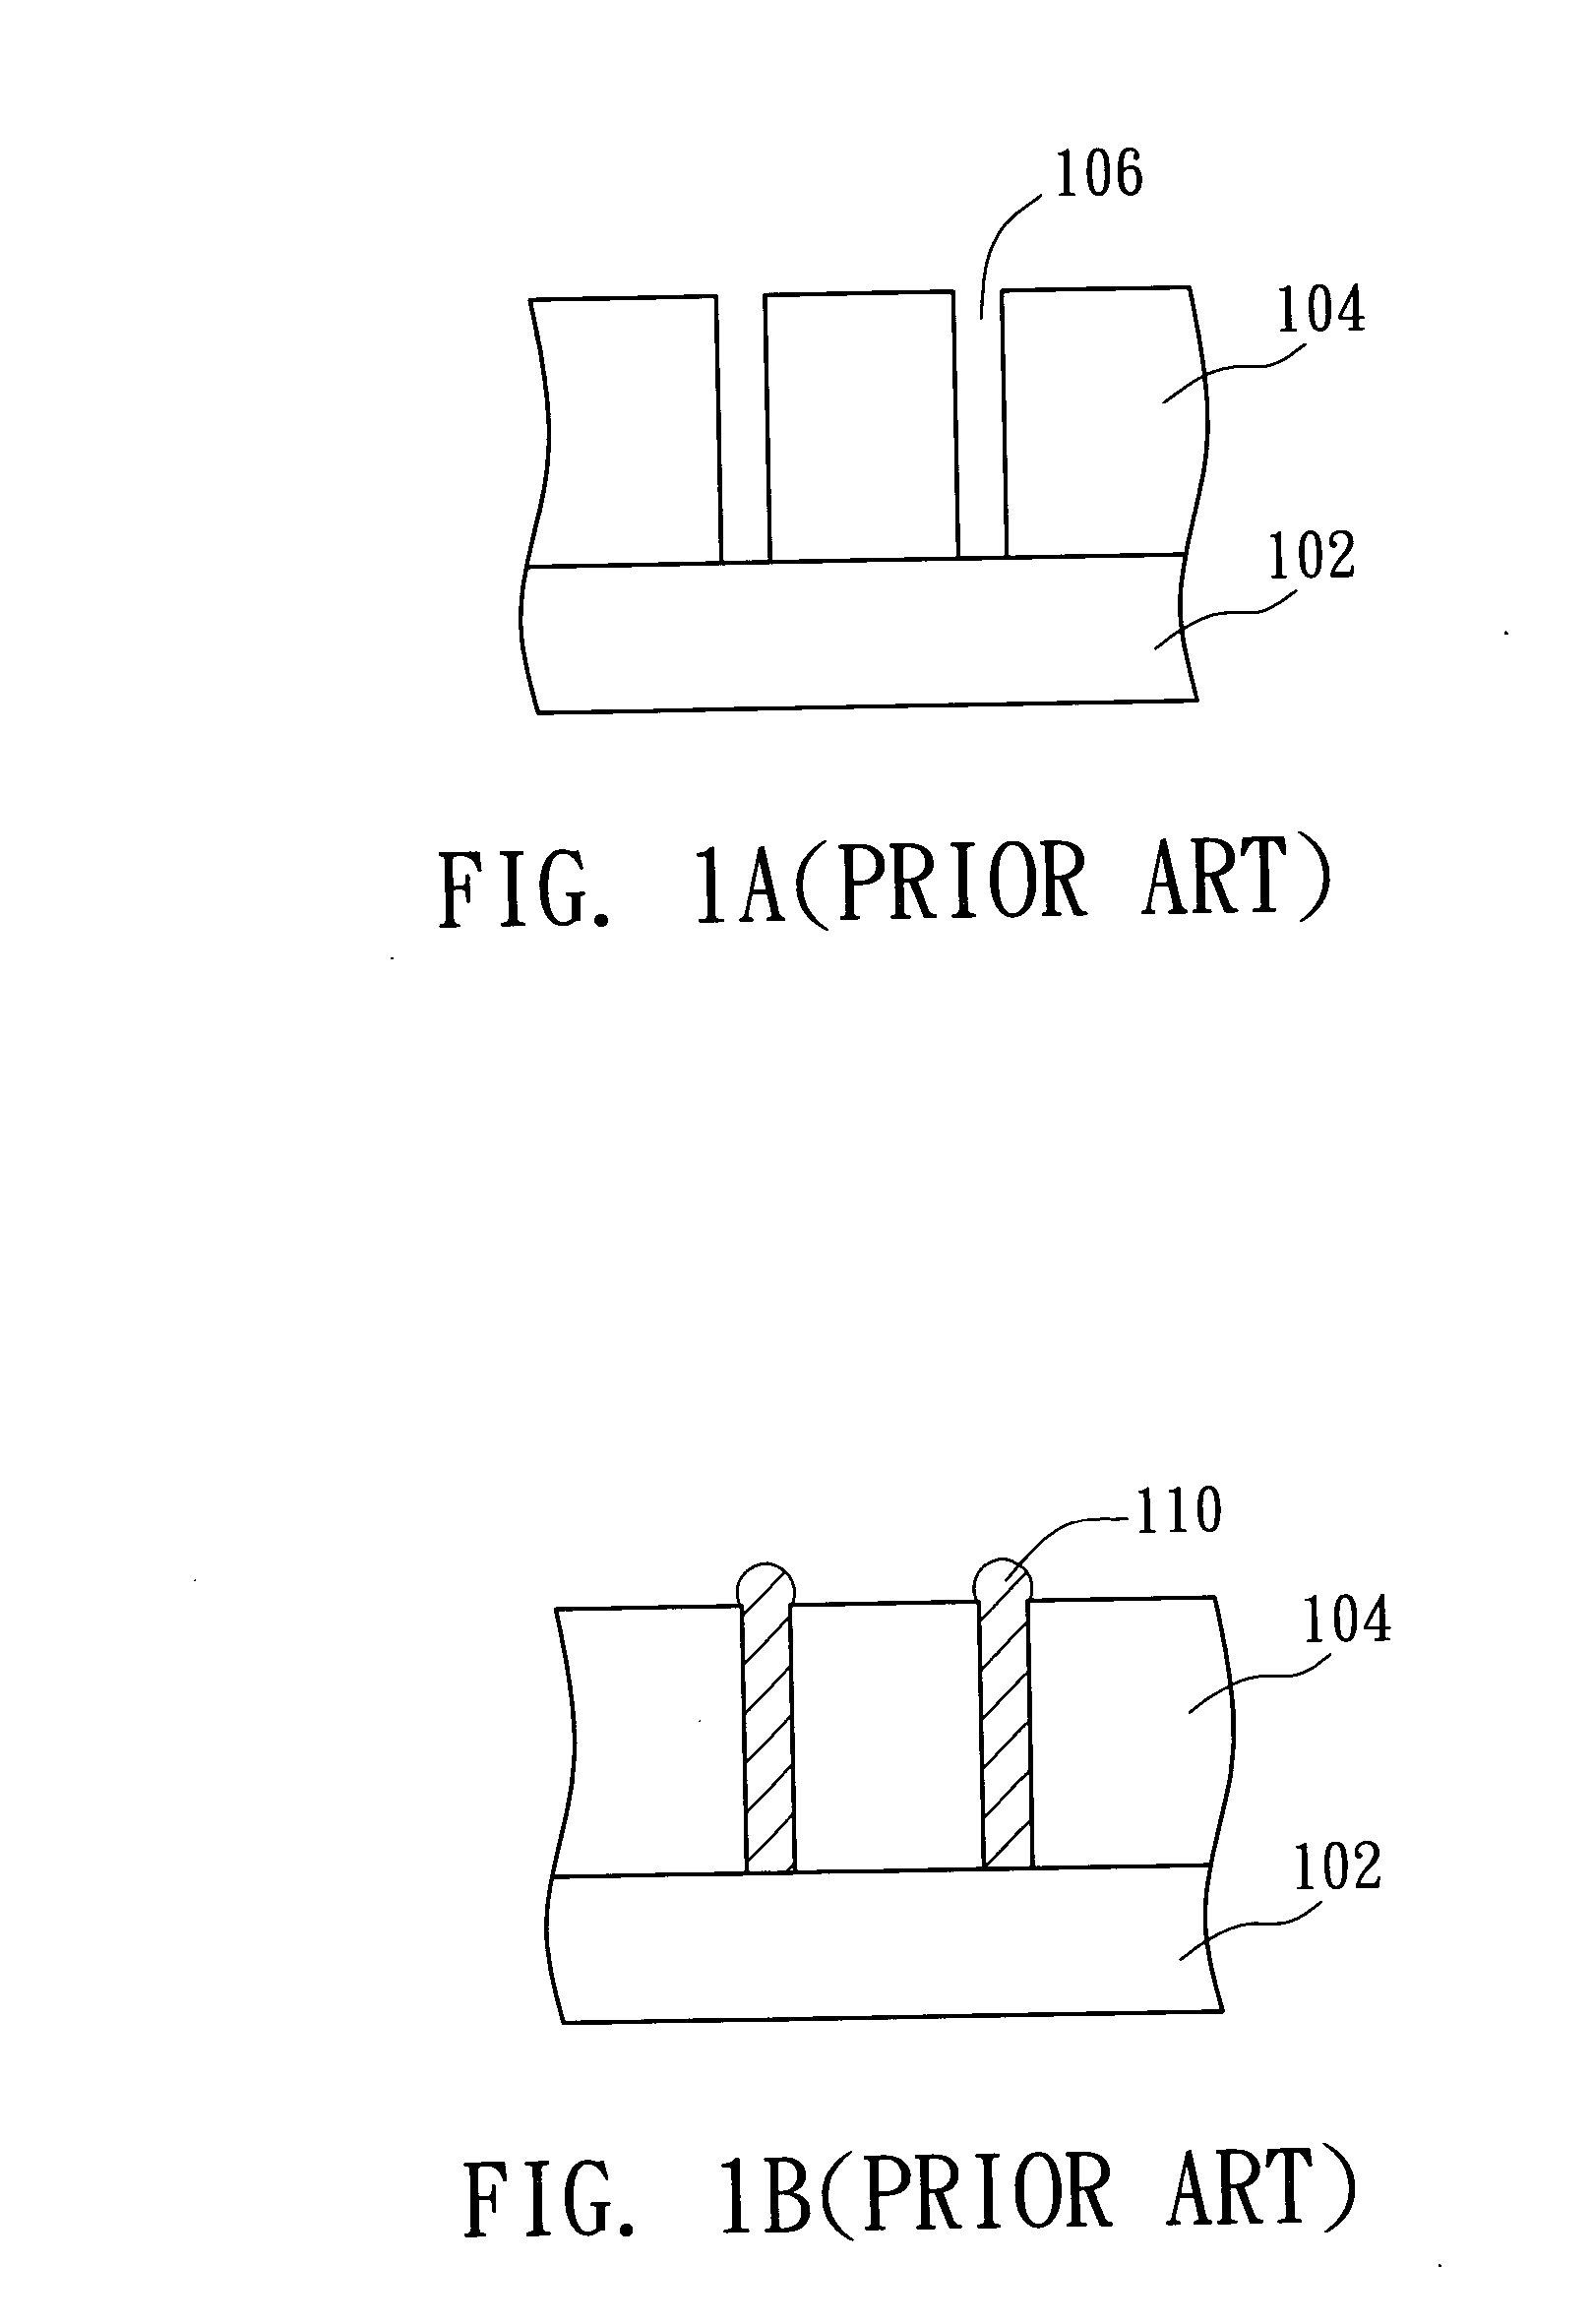 Hillock-free aluminum layer and method of forming the same